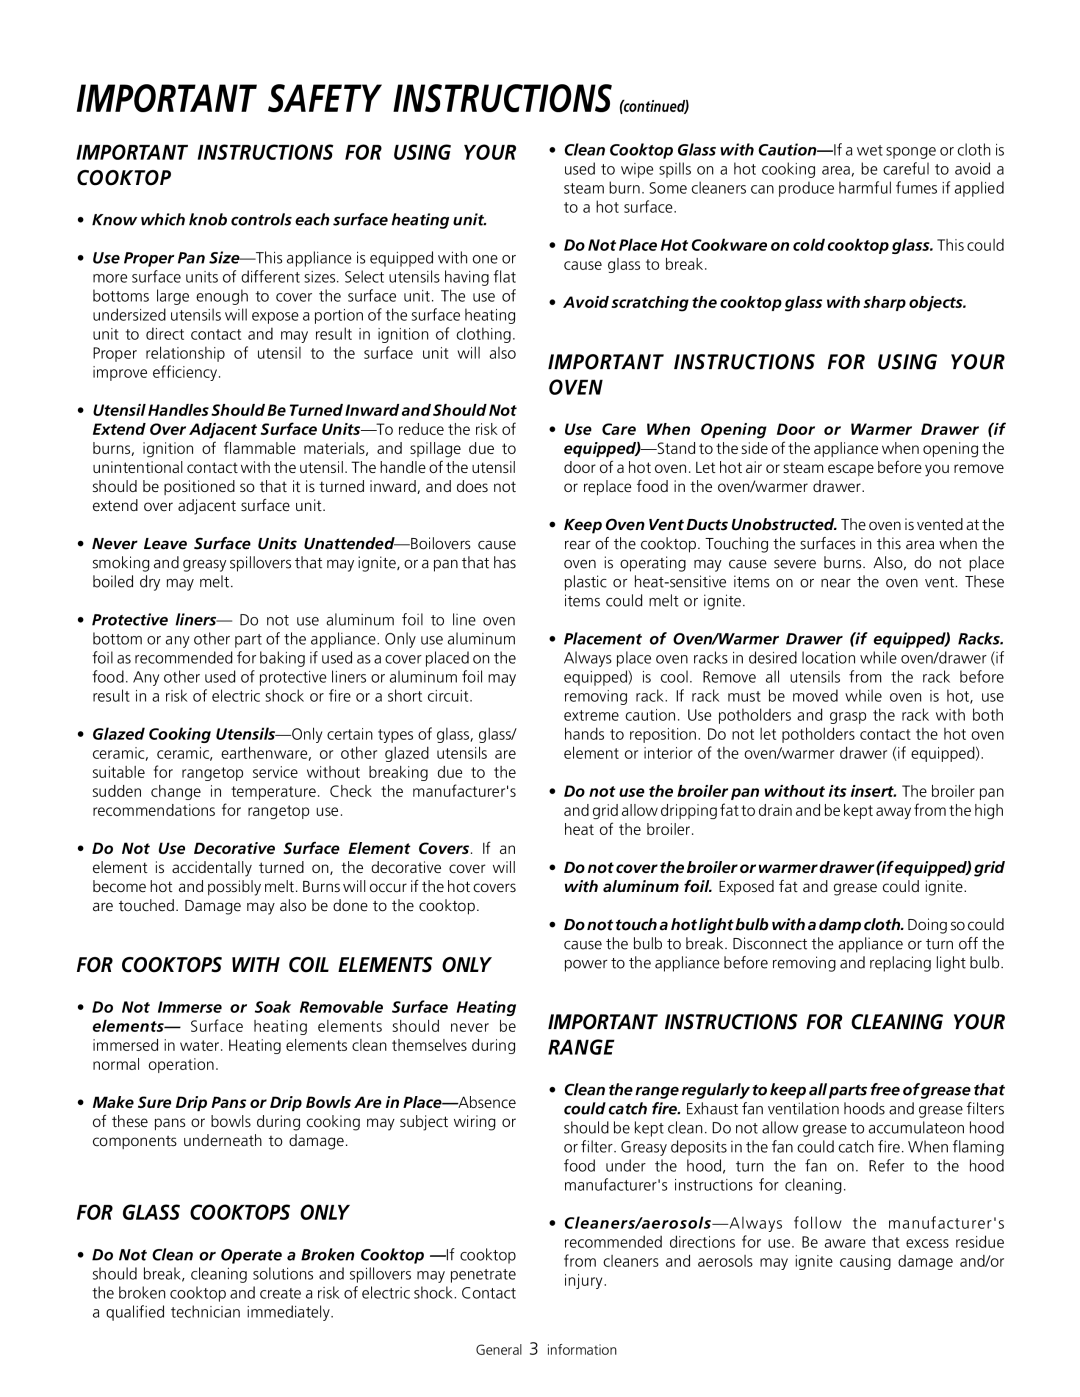 Frigidaire 318200805 warranty IMPORTANT SAFETY INSTRUCTIONS continued, Important Instructions For Using Your Cooktop 